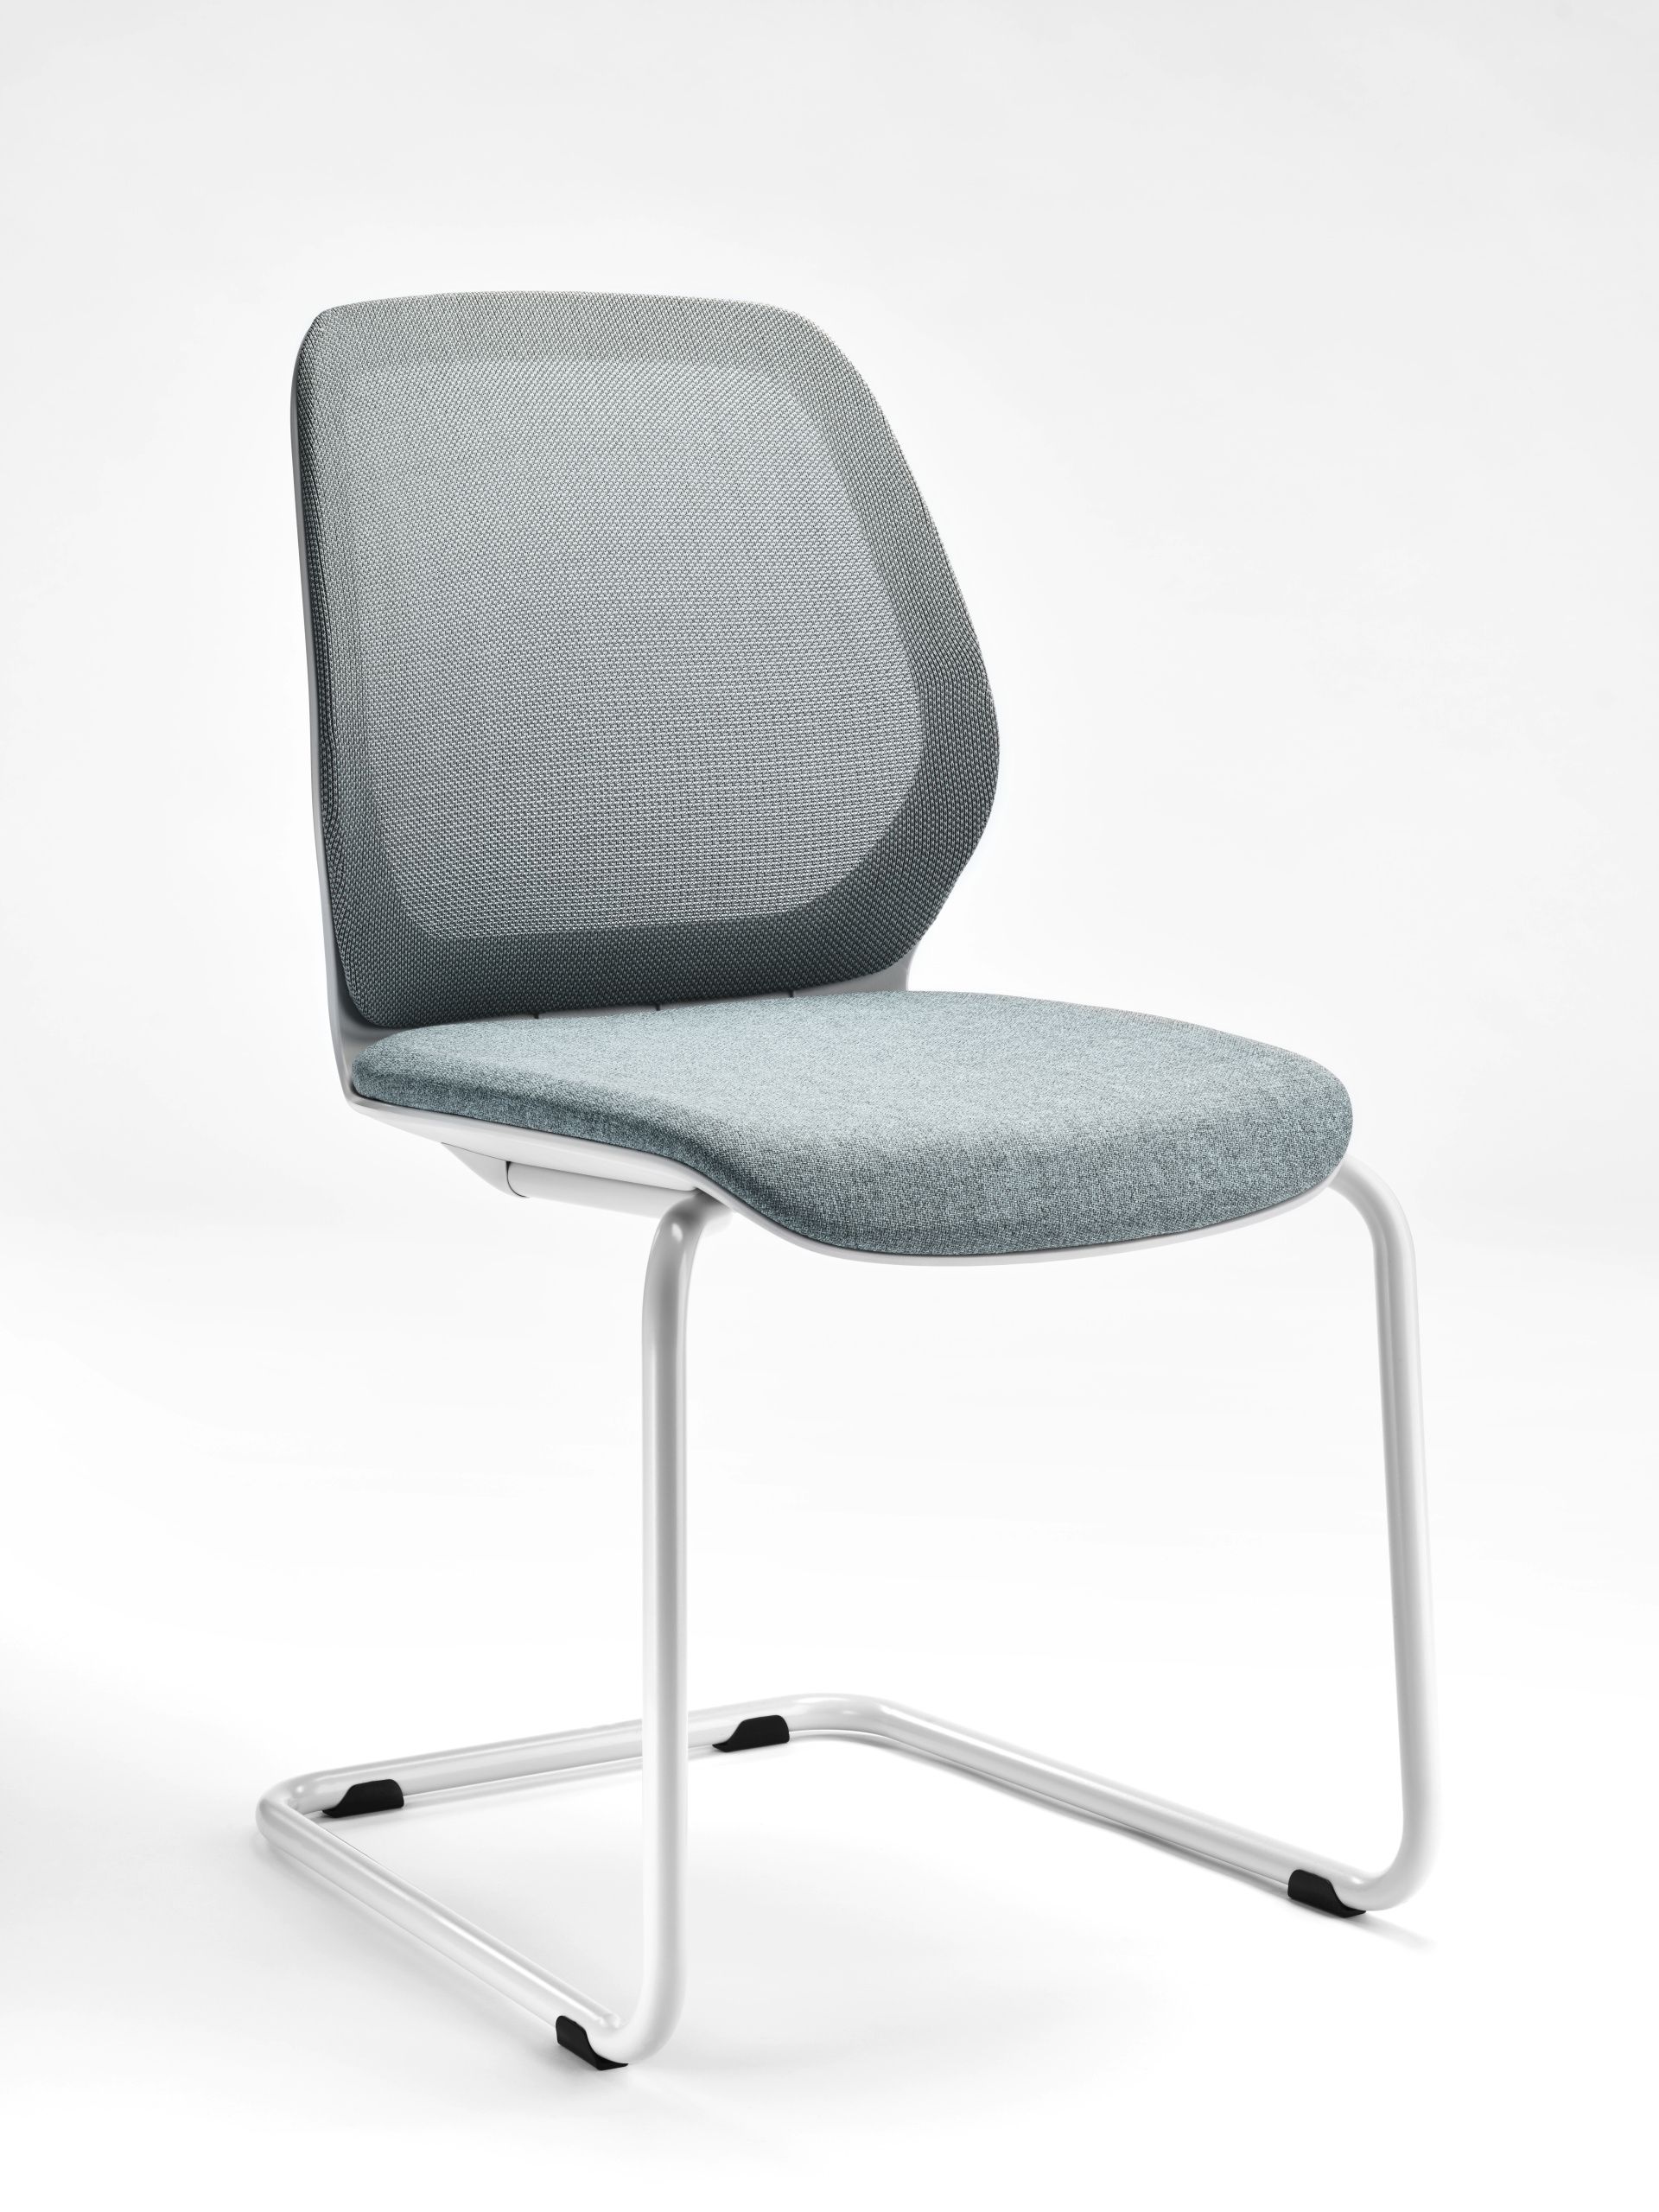 Welcoming Comfort: Elevate Your Space with Visitor Chairs